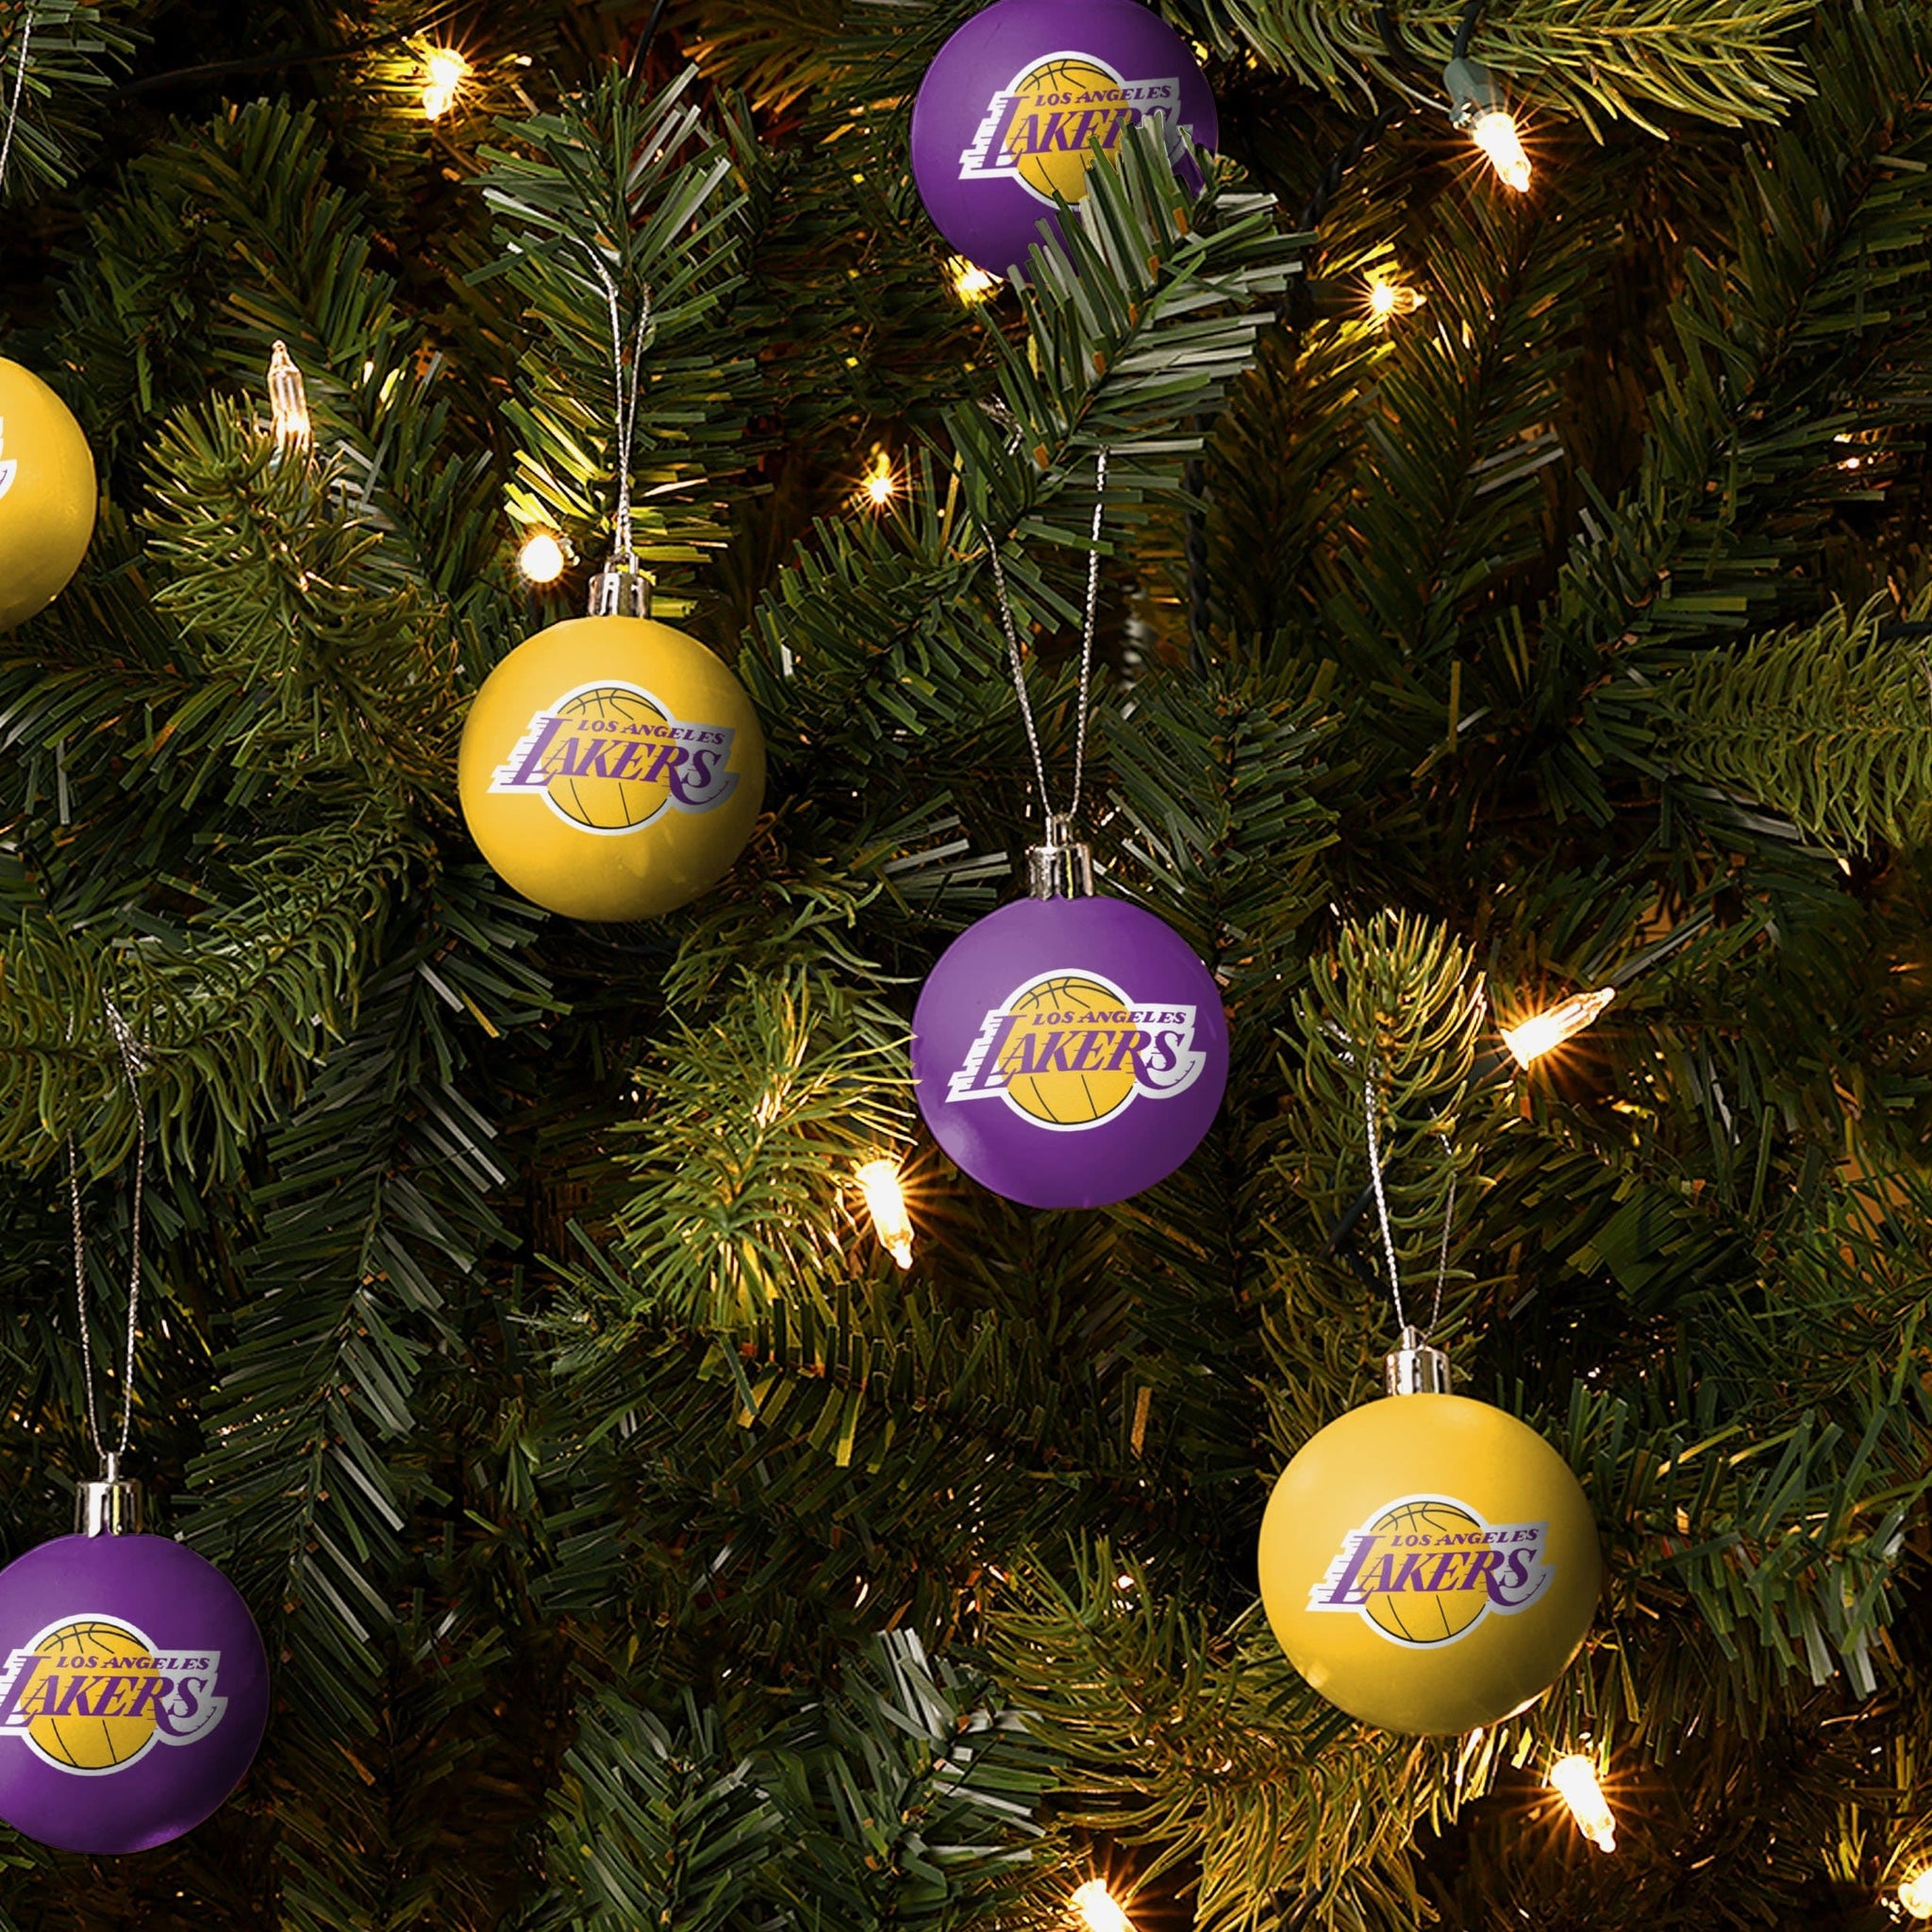 Los Angeles Lakers Fan Buying Guide, Gifts, Holiday Shopping